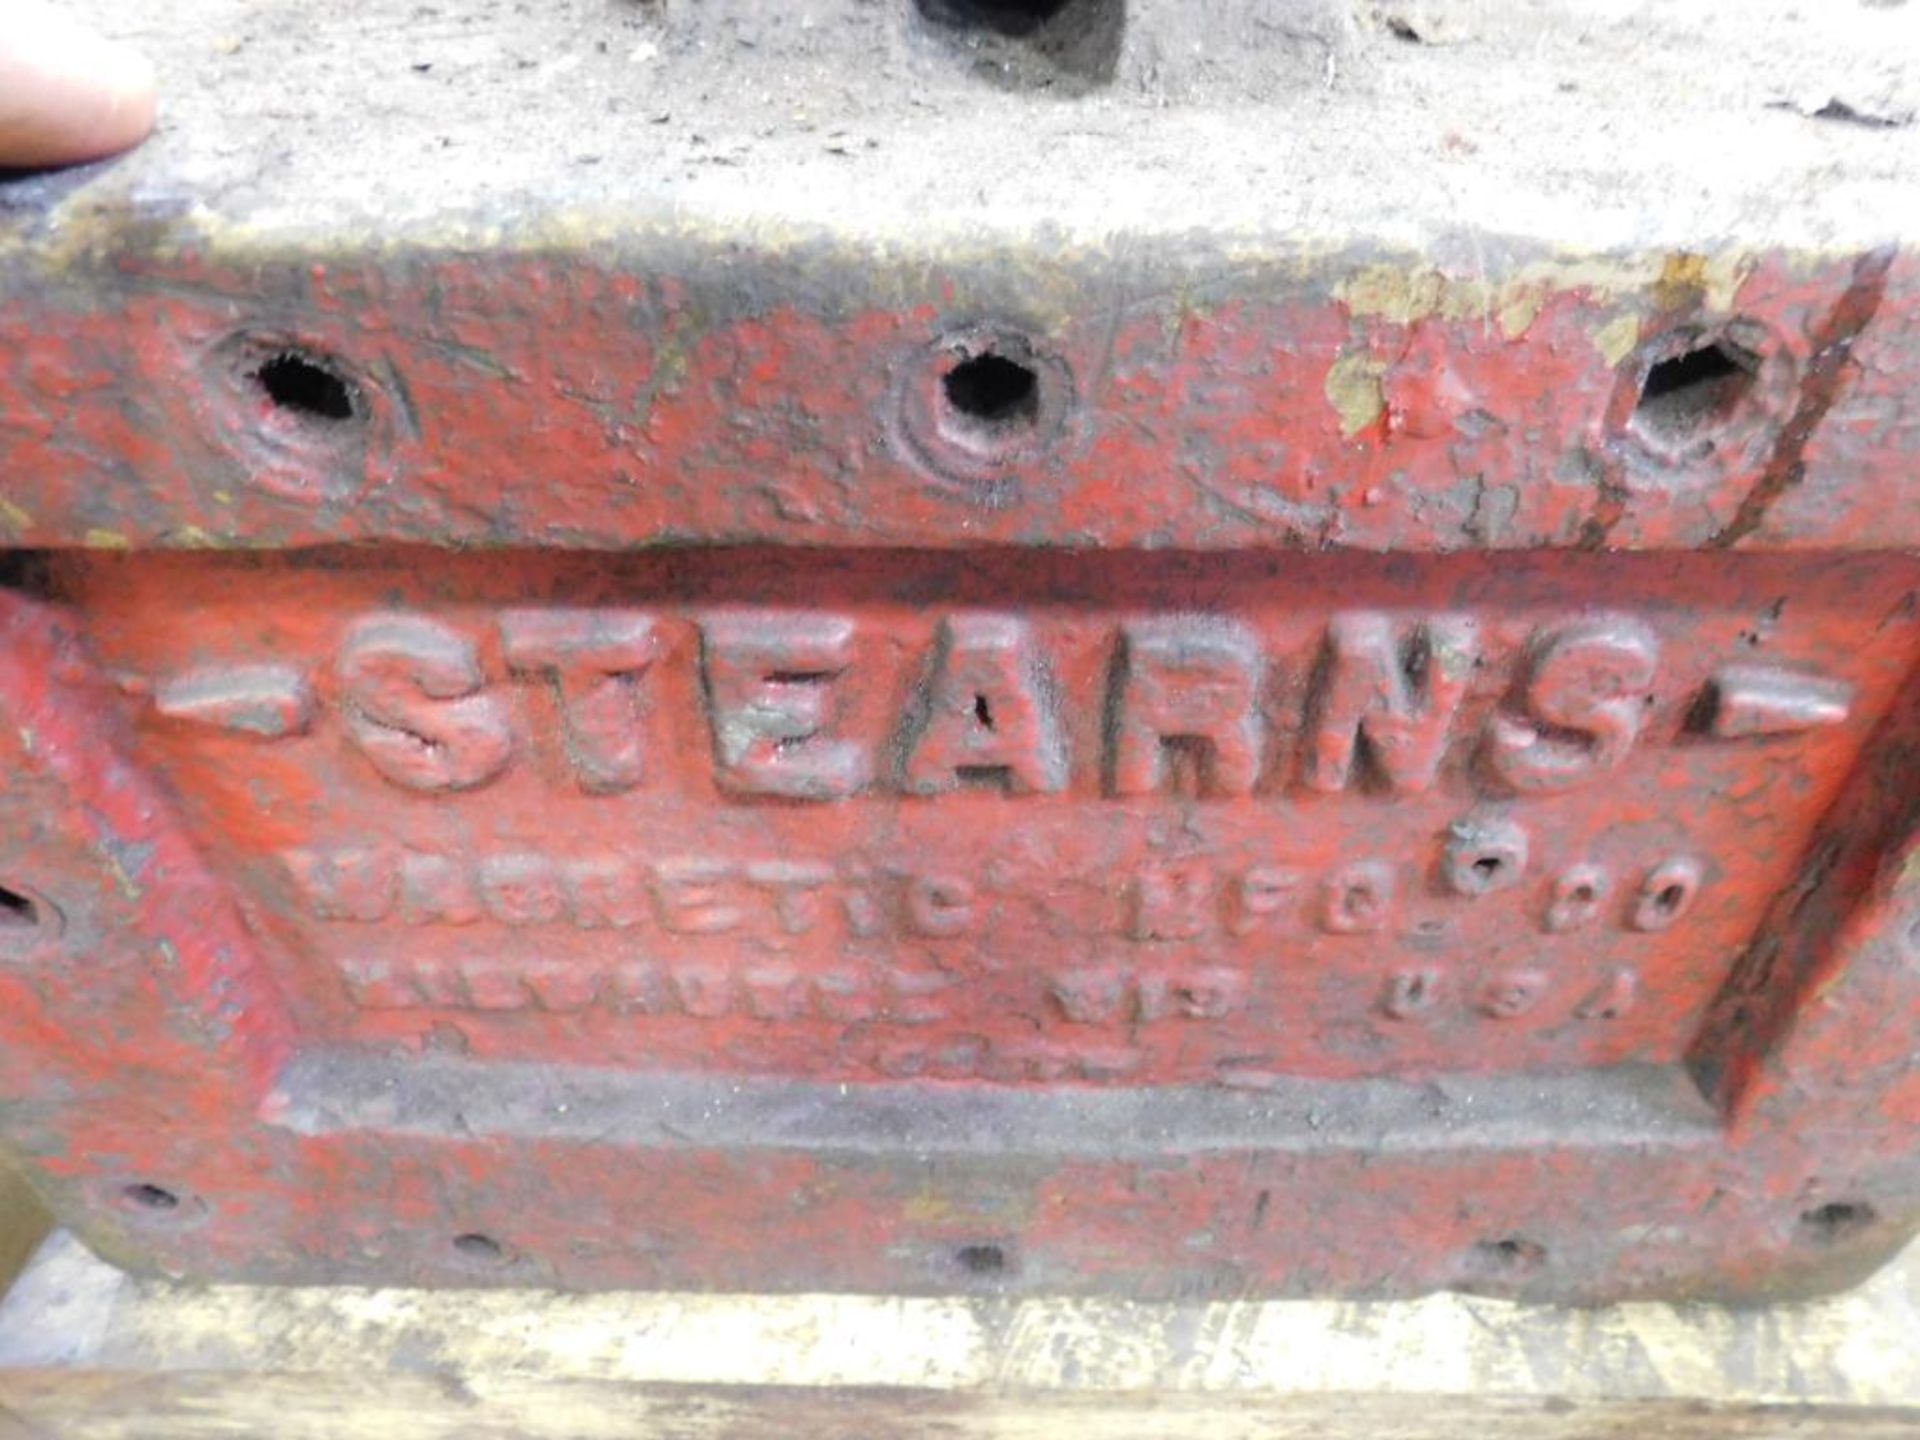 Stearns Magnetic Mfg 24" x 16" Electromagnetic Lifting Magnet - Image 3 of 3